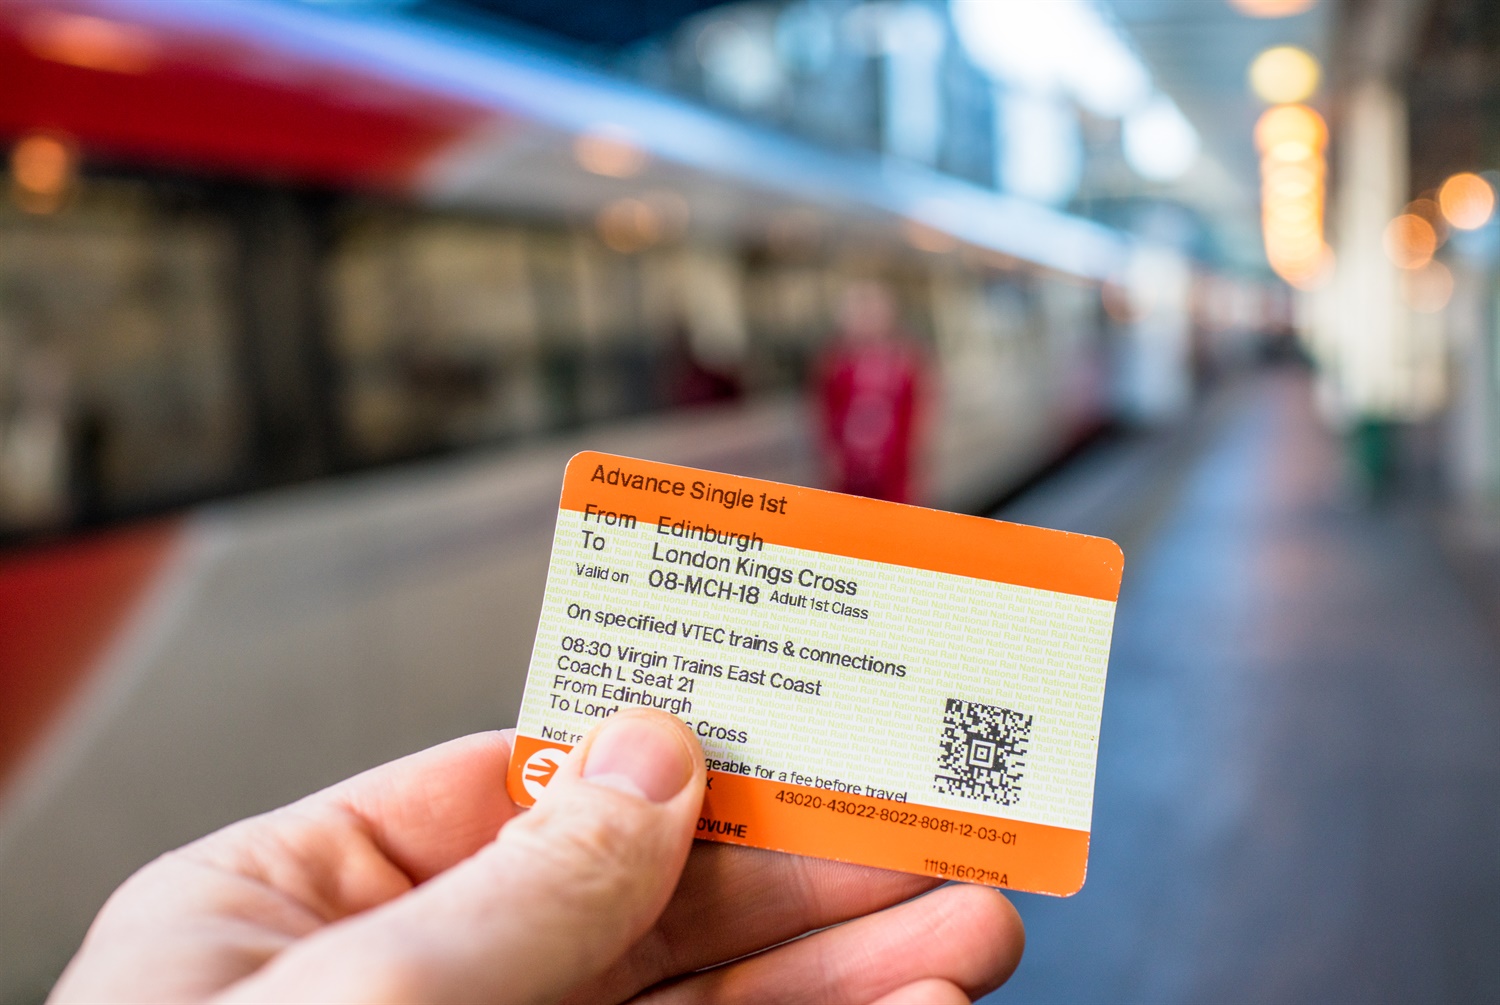 Rail fares must be simplified if HS2 is to ‘raise the bar’ as promised